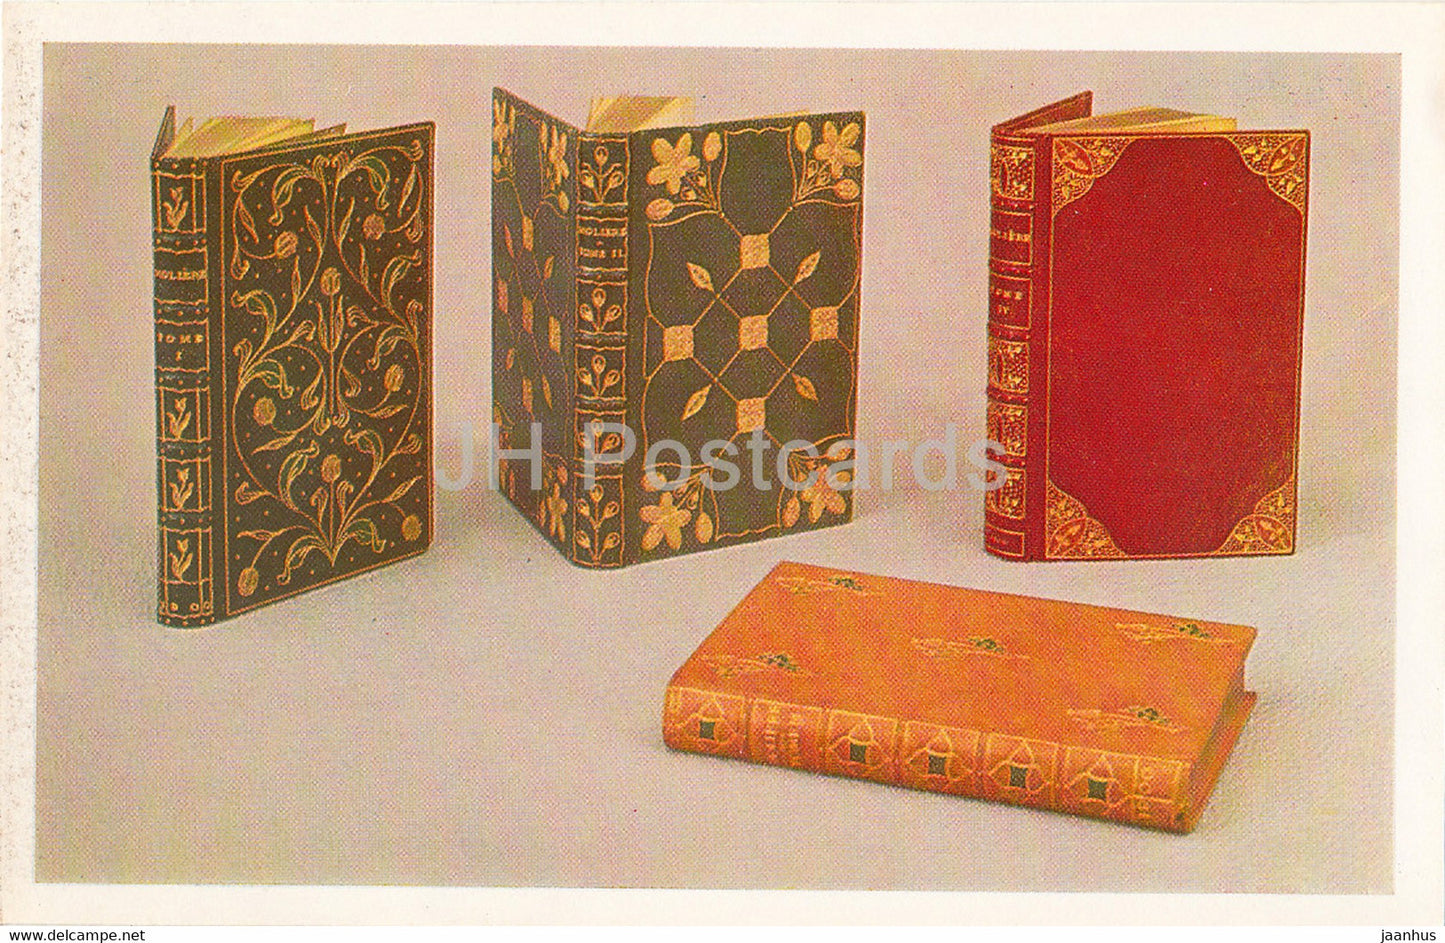 Book Covers of OEuvres completes de Moliere - leather - English Applied Art - 1983 - Russia USSR - unused - JH Postcards